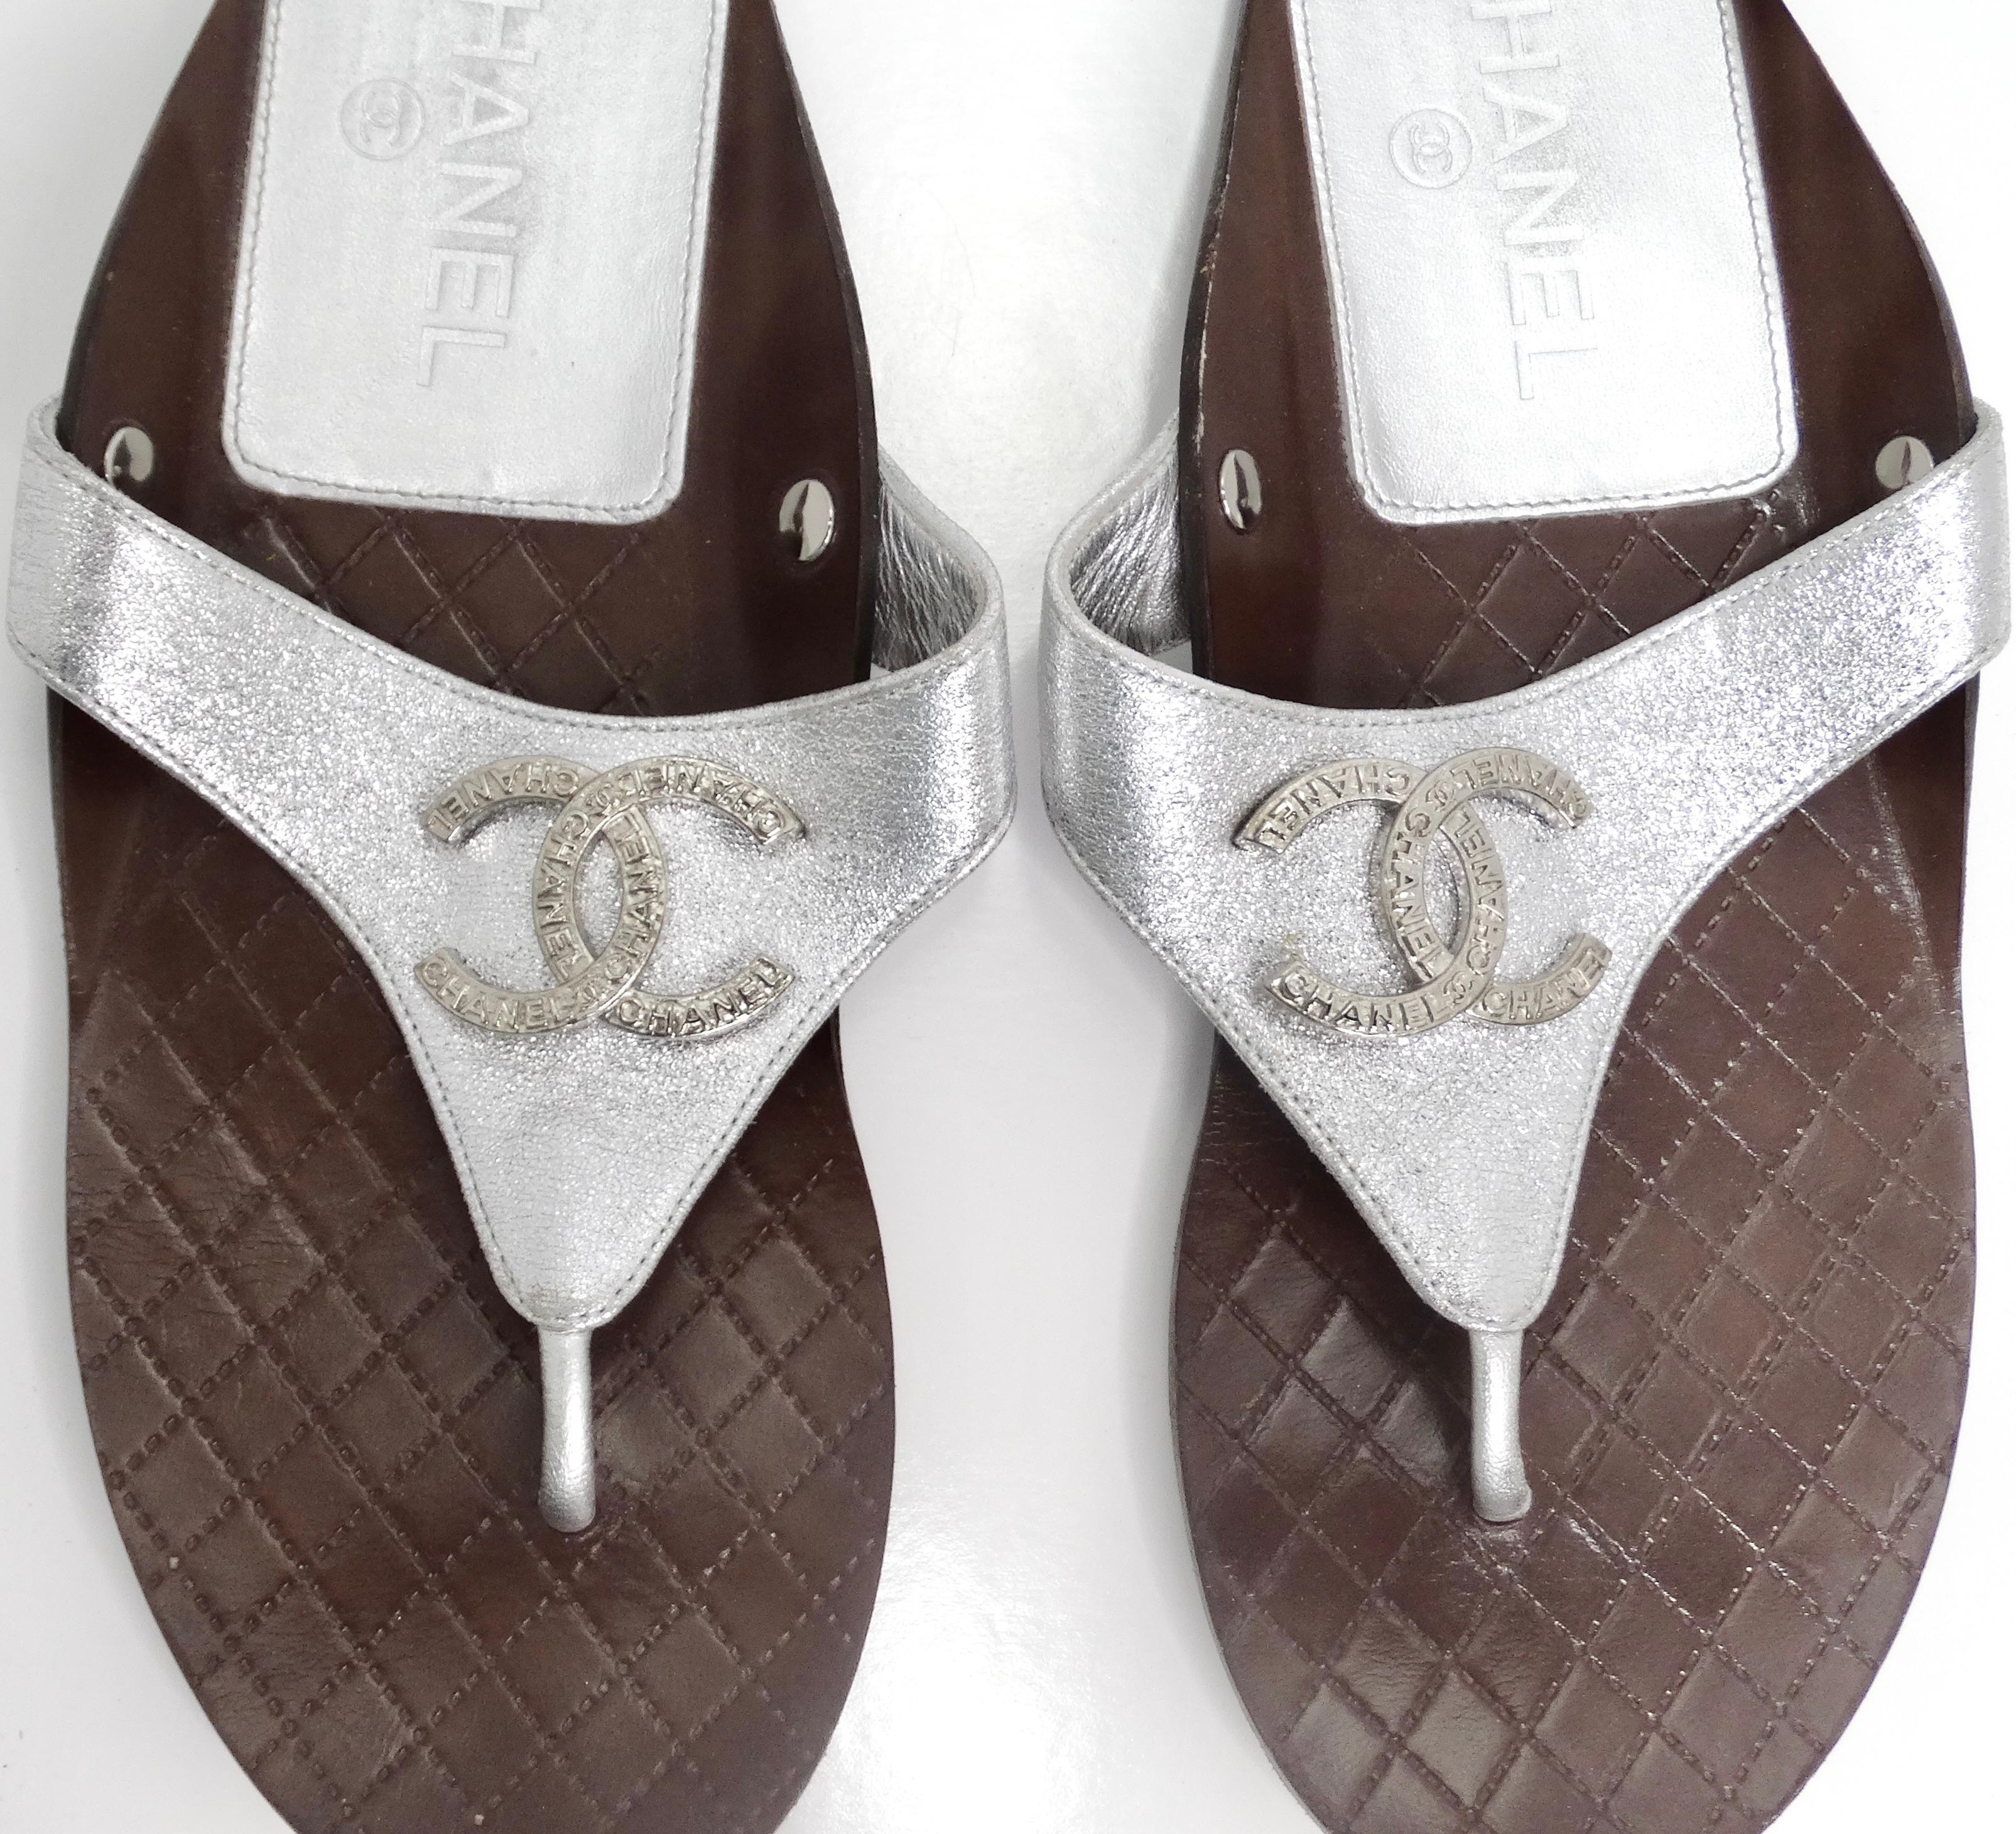 Chanel 2018 CC Silver Leather Sandals In Good Condition For Sale In Scottsdale, AZ